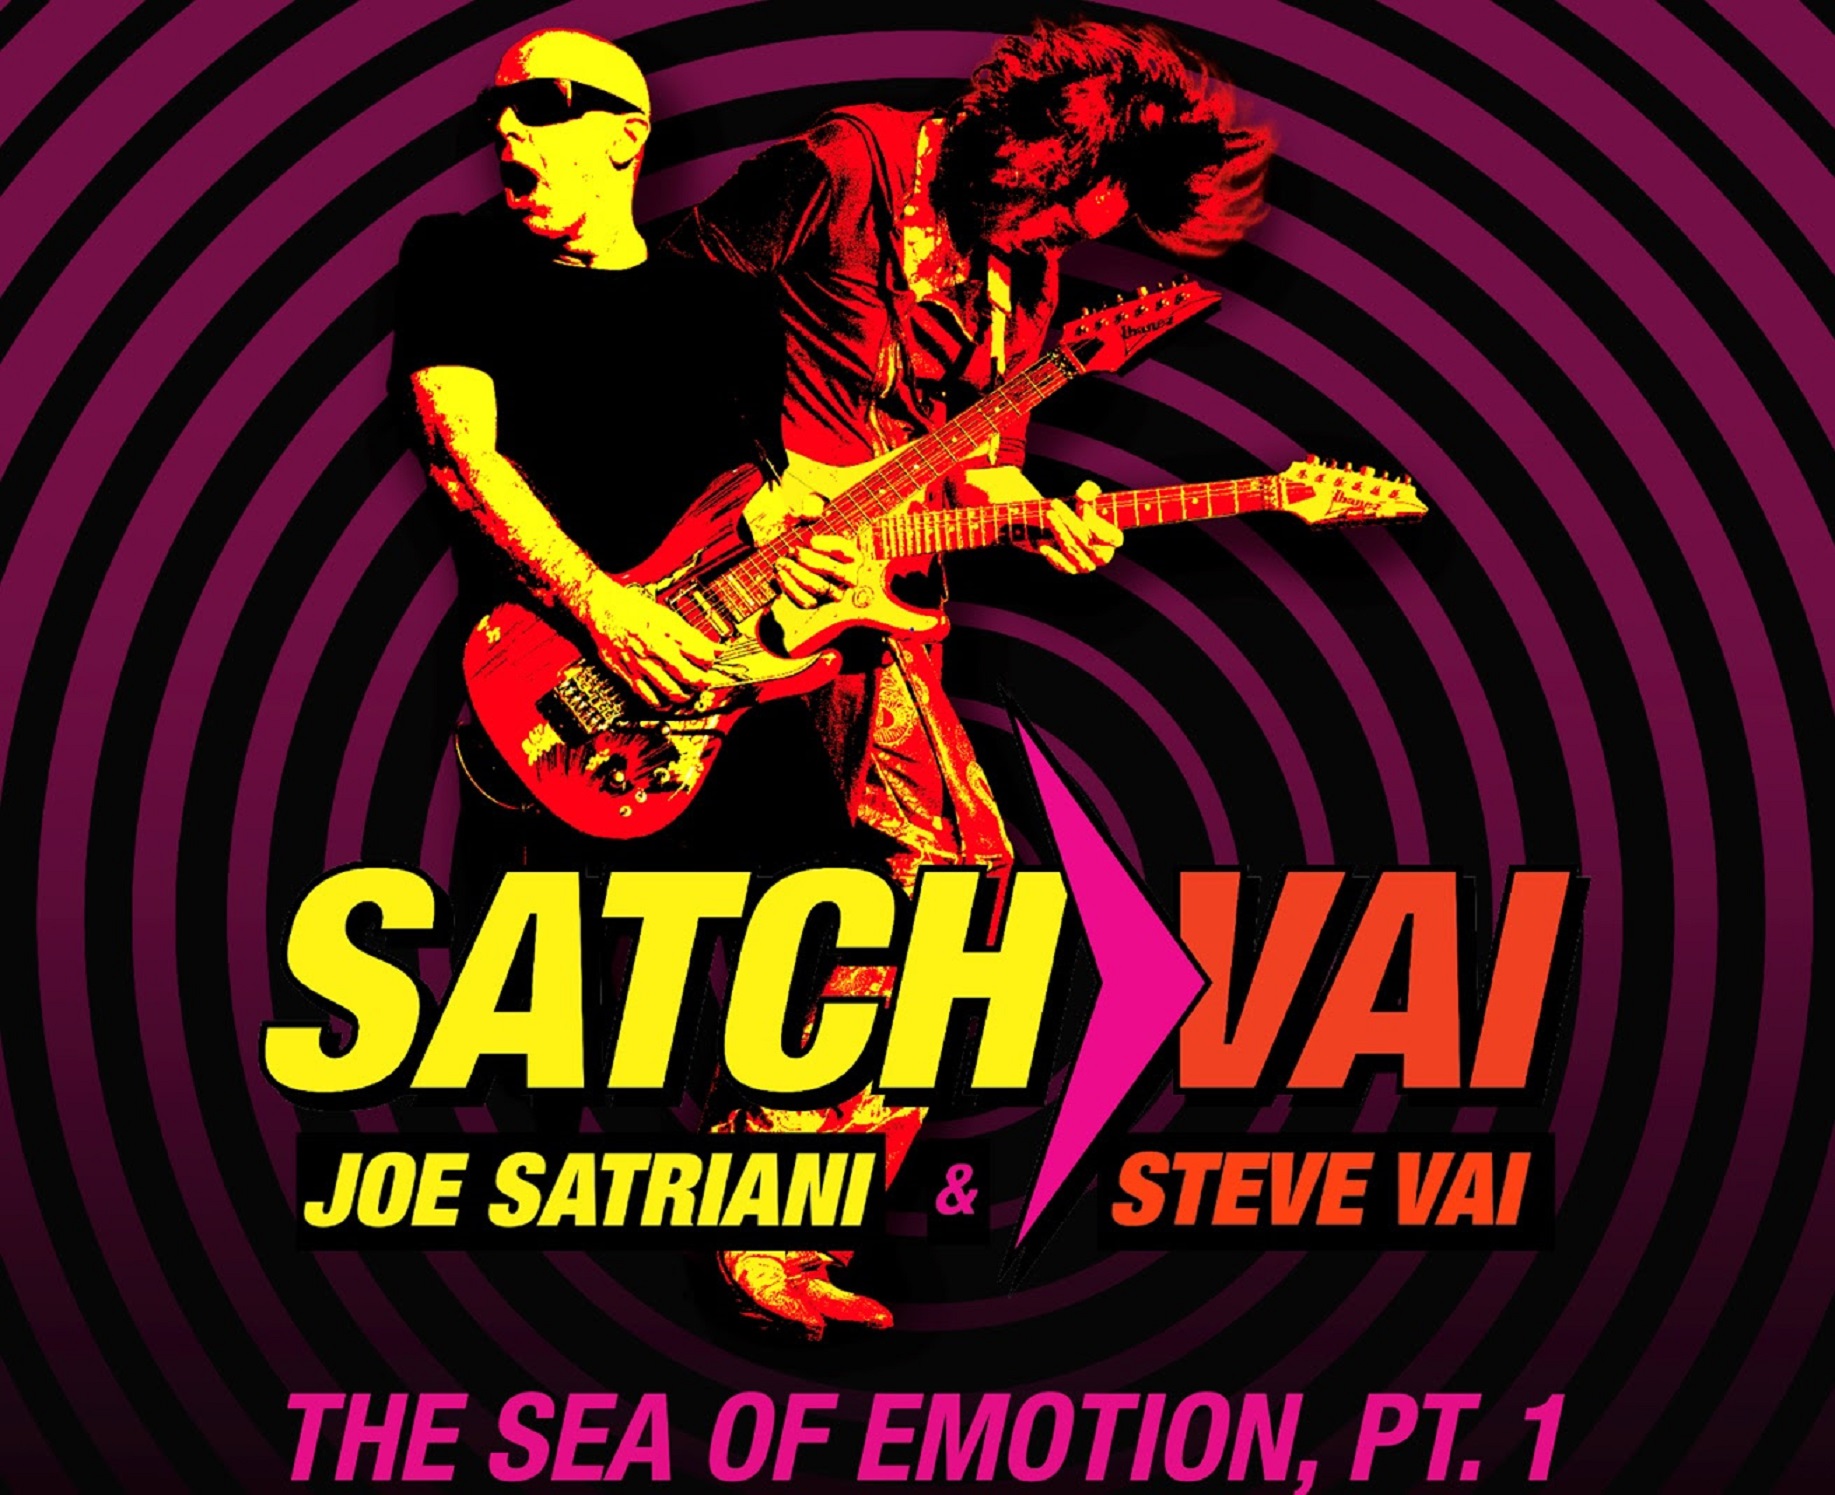 JOE SATRIANI and STEVE VAI - Release New Music Together - For The FIRST Time